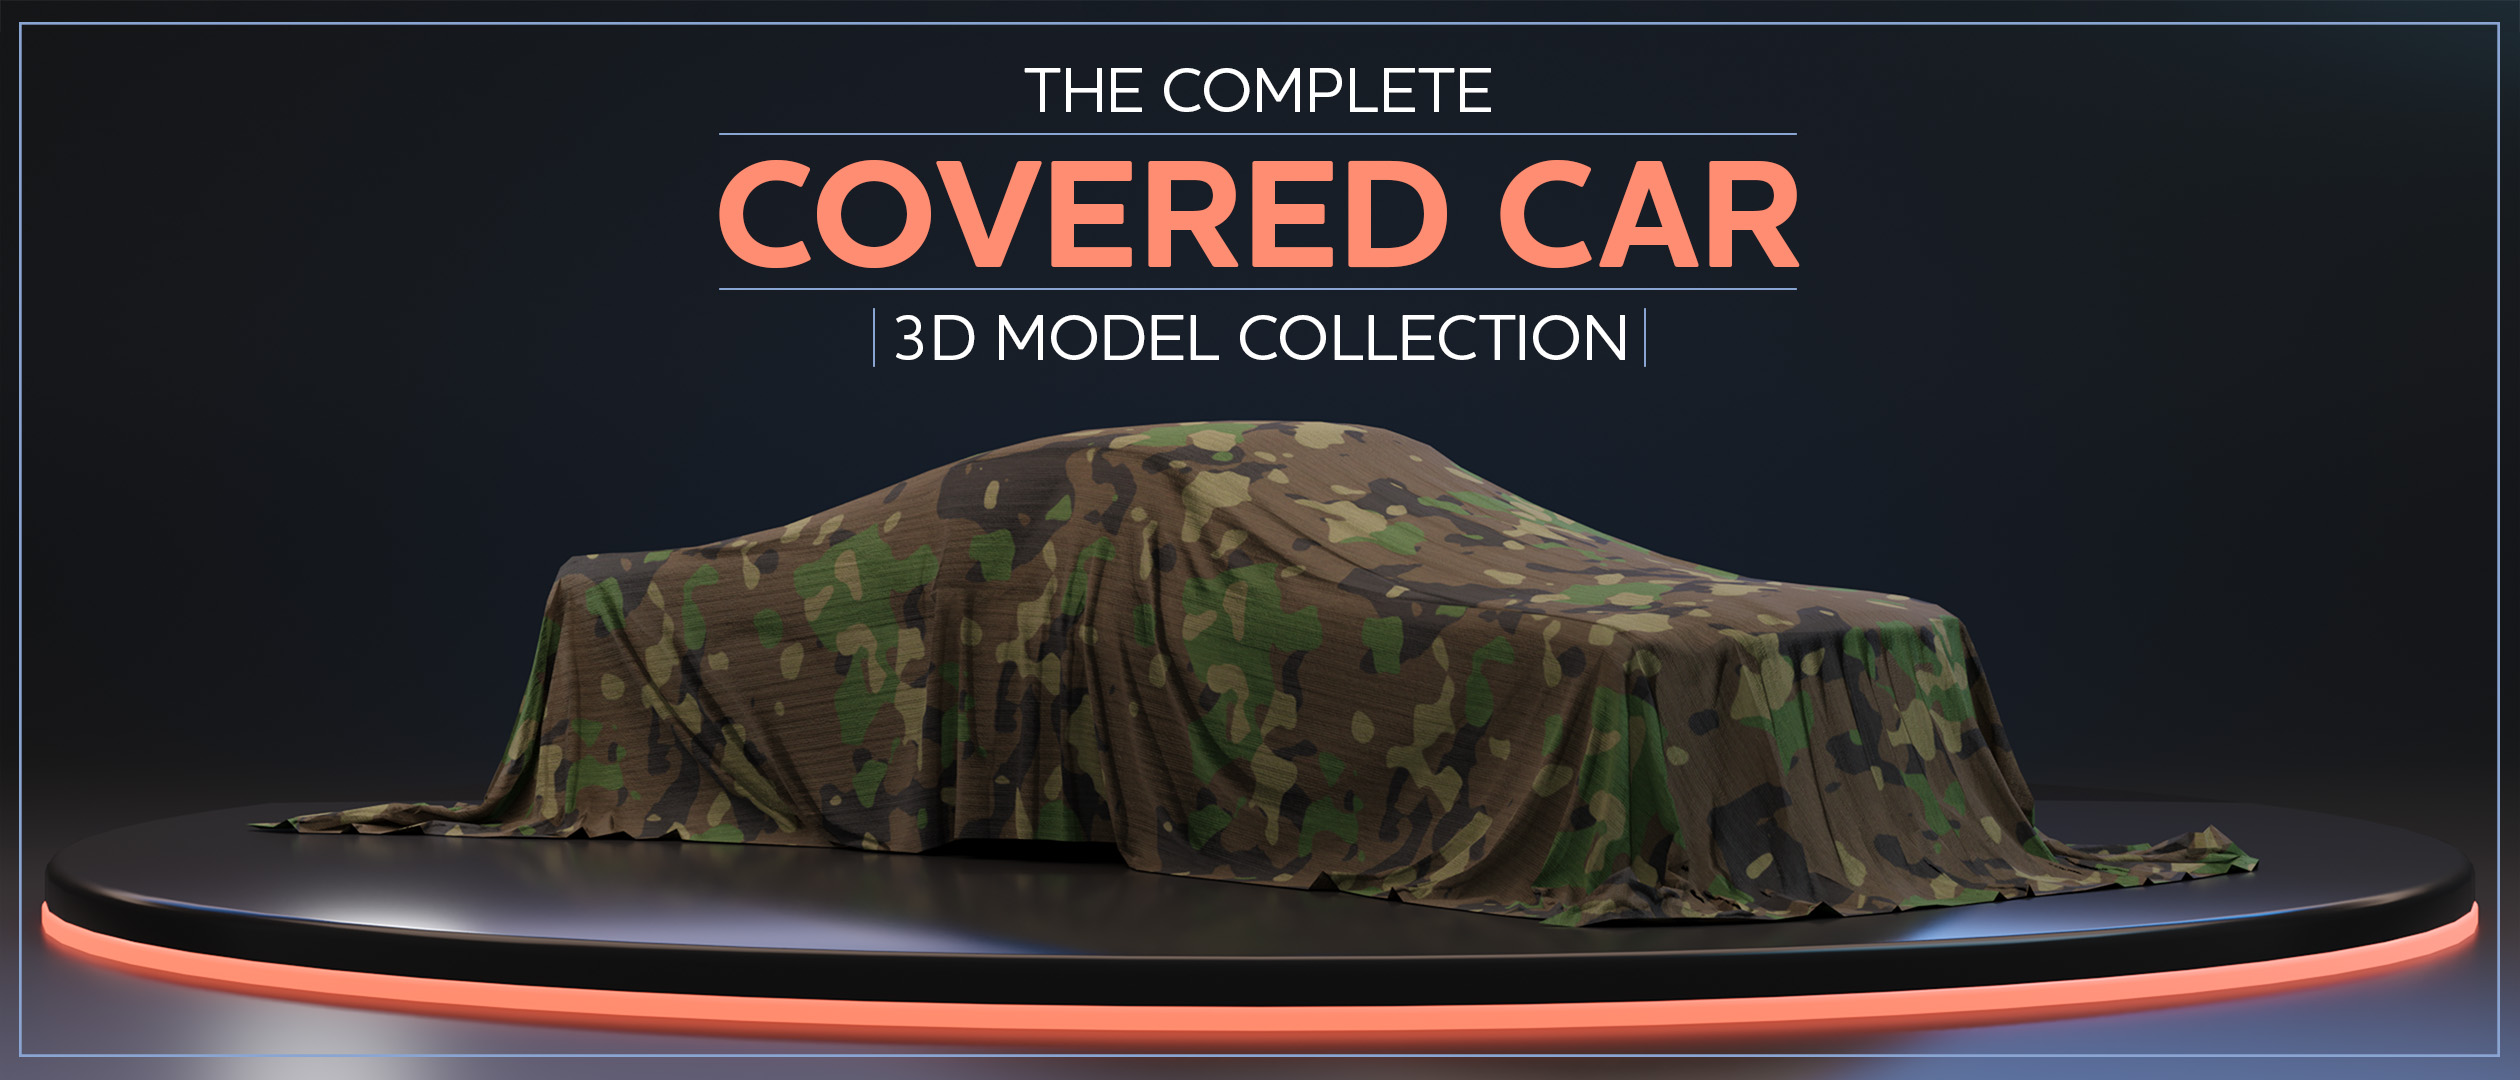 The Complete Covered Car 3D Model Collection